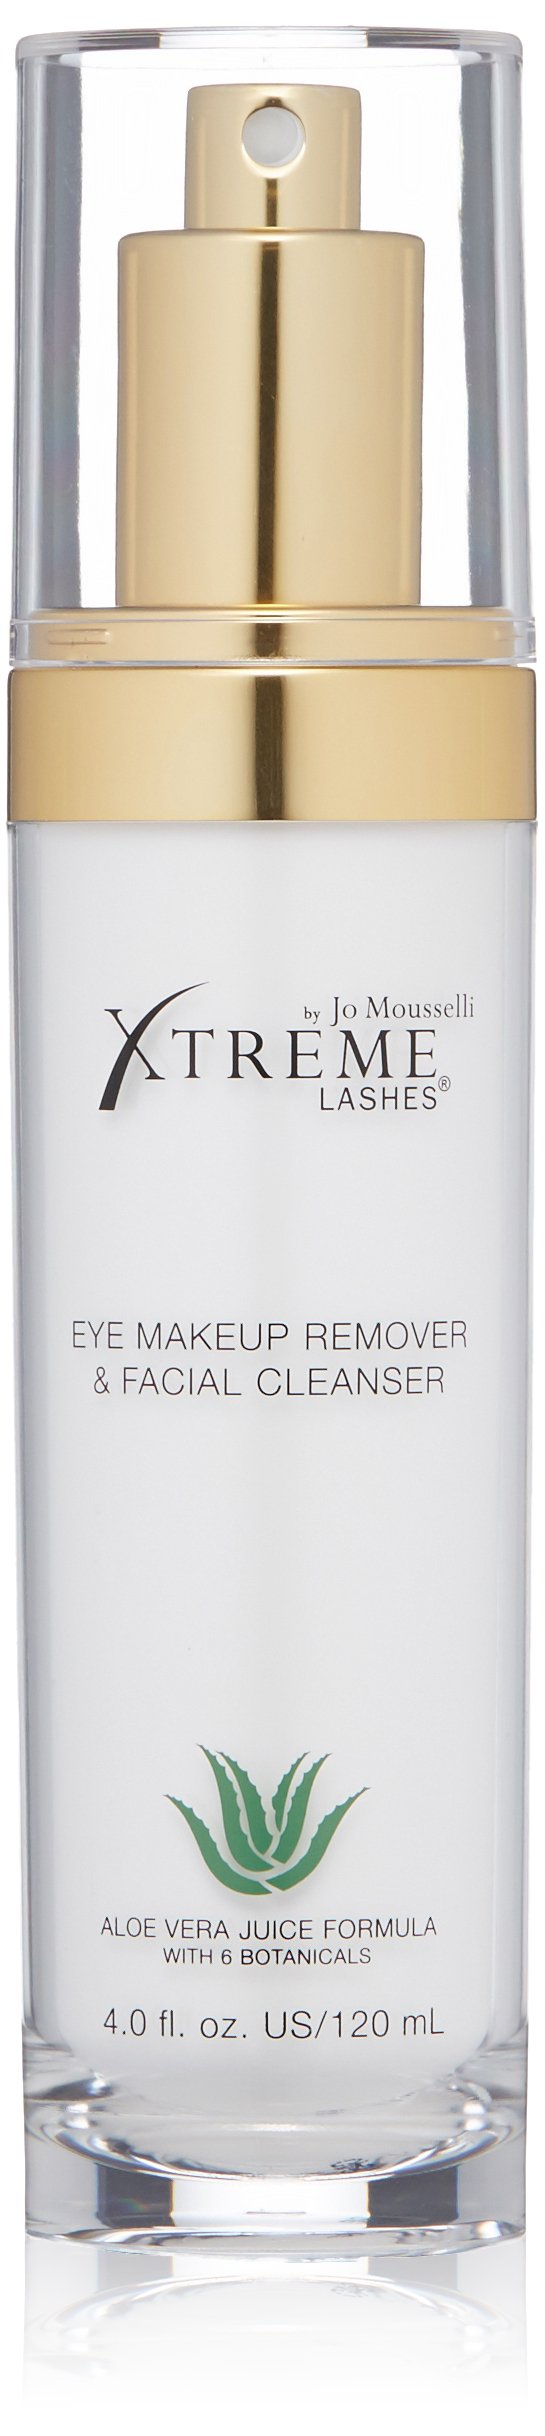 Xtreme Lashes Makeup Remover and Facial Cleanser